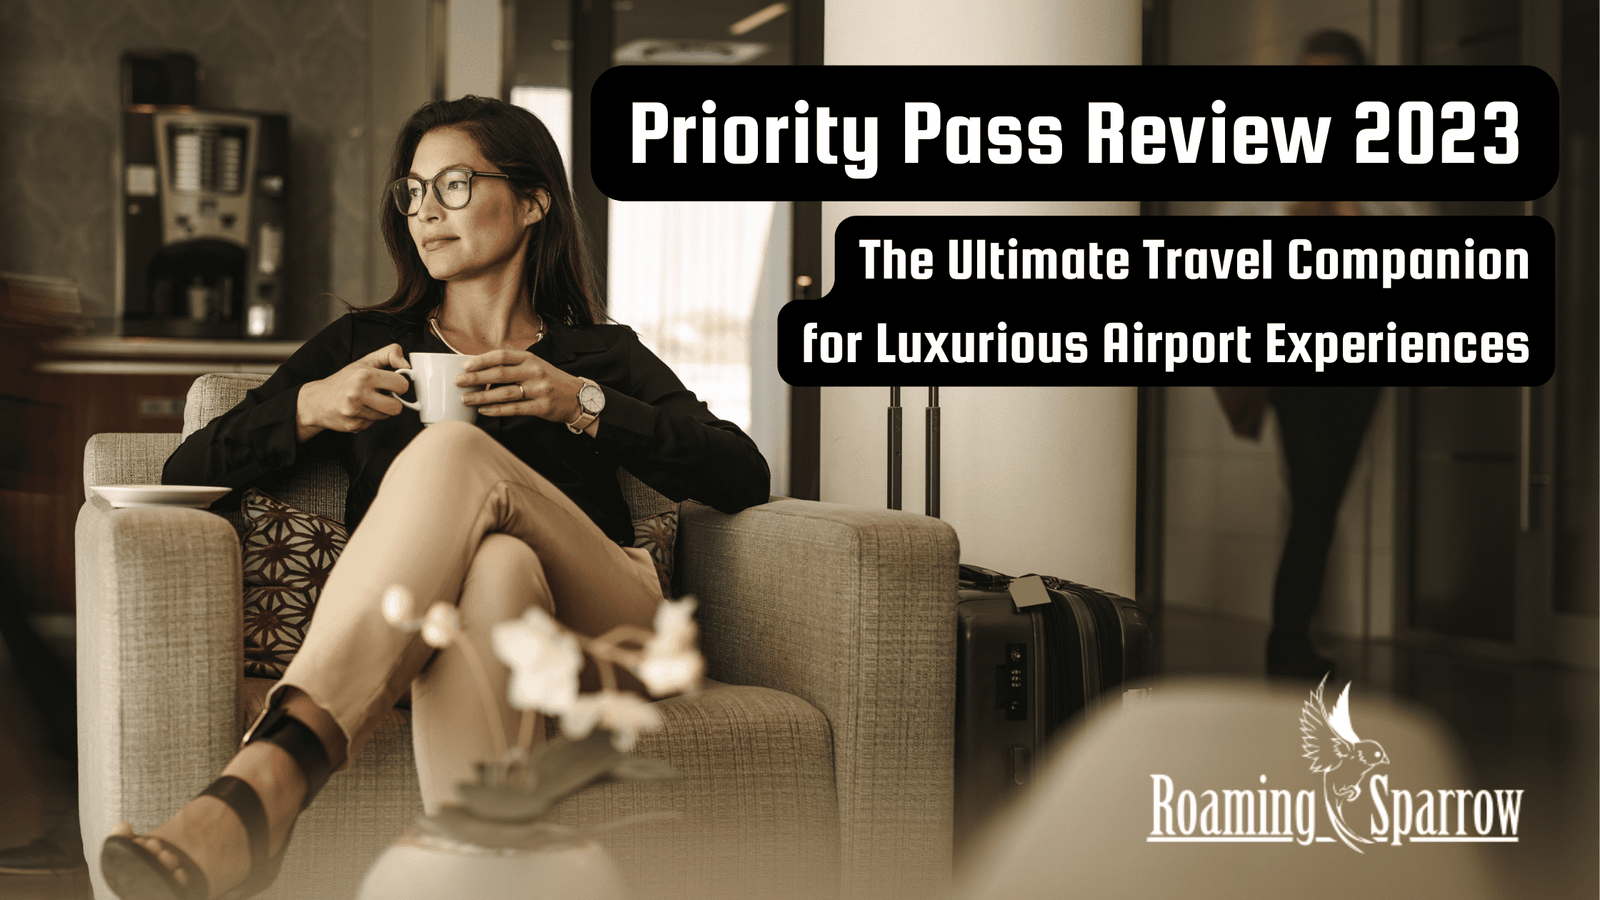 Priority Pass Review 2023: The Ultimate Travel Companion for Luxurious Airport Experiences